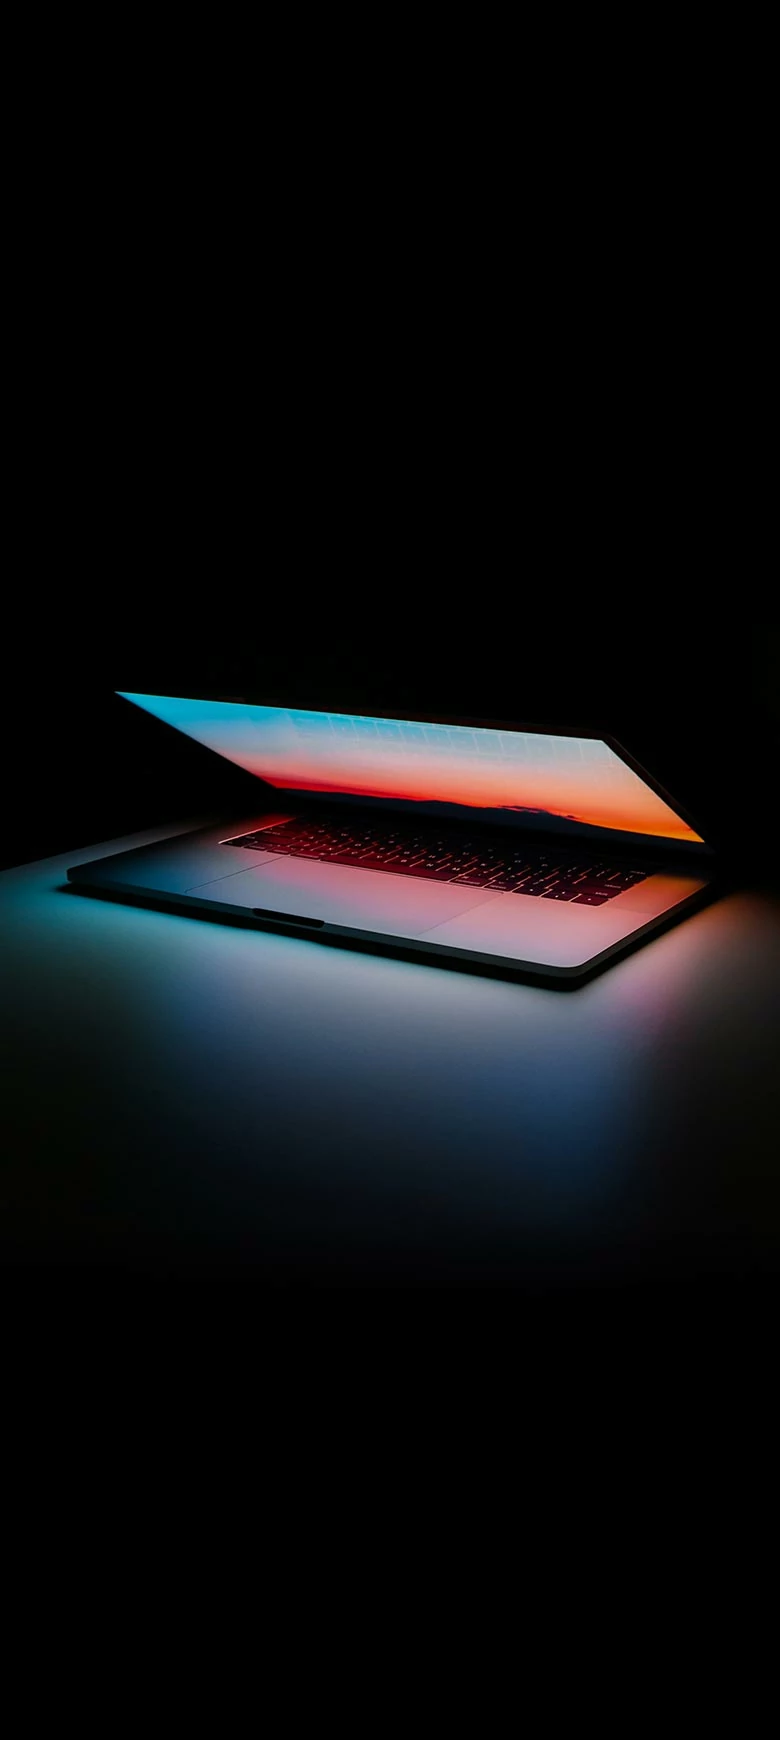 A laptop in front of a dark background. The display is half folded down, its colorful glow illuminating the scenery. 